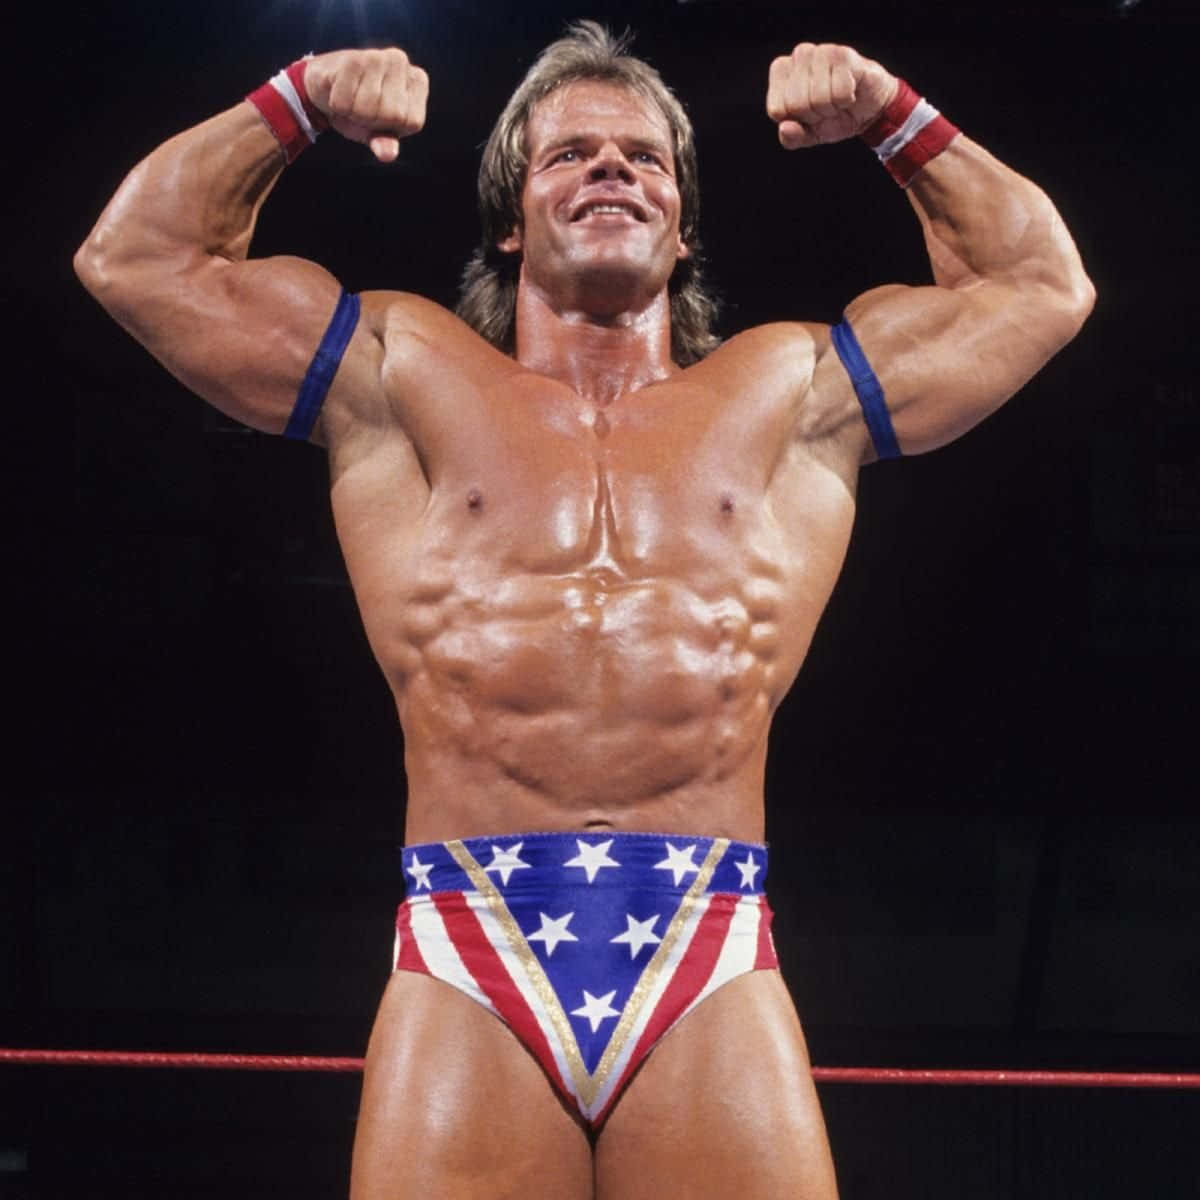 WWE and WCW Superstar Lex Luger posing for a wrestling promo. Wallpaper